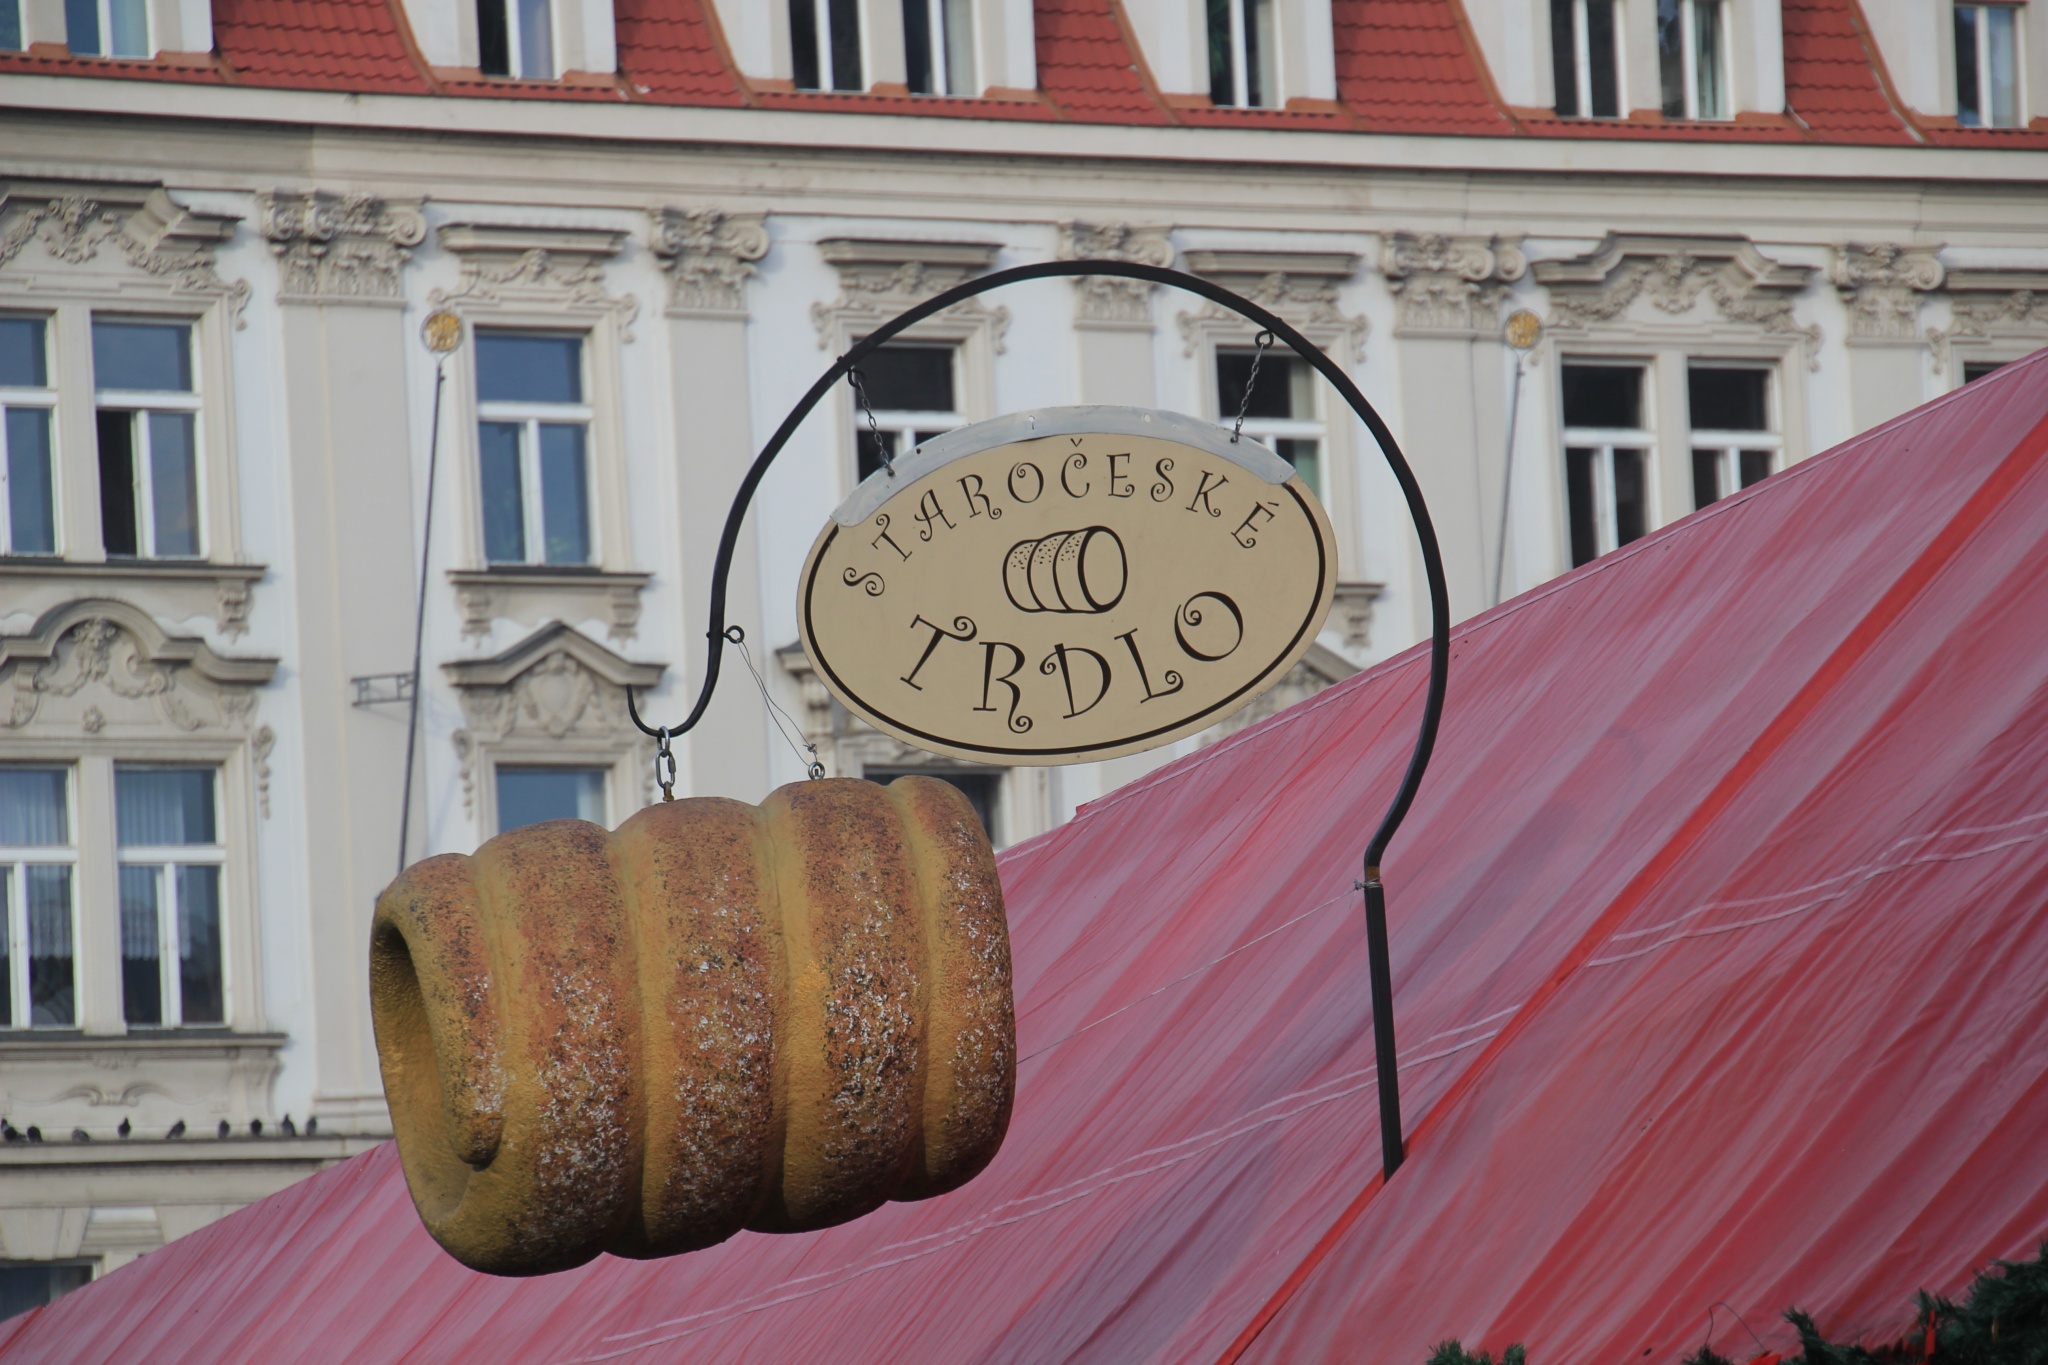 An enormous trdelnik hangs attached to a sign above a trdelnik vendor in Prague's Old Town Square.